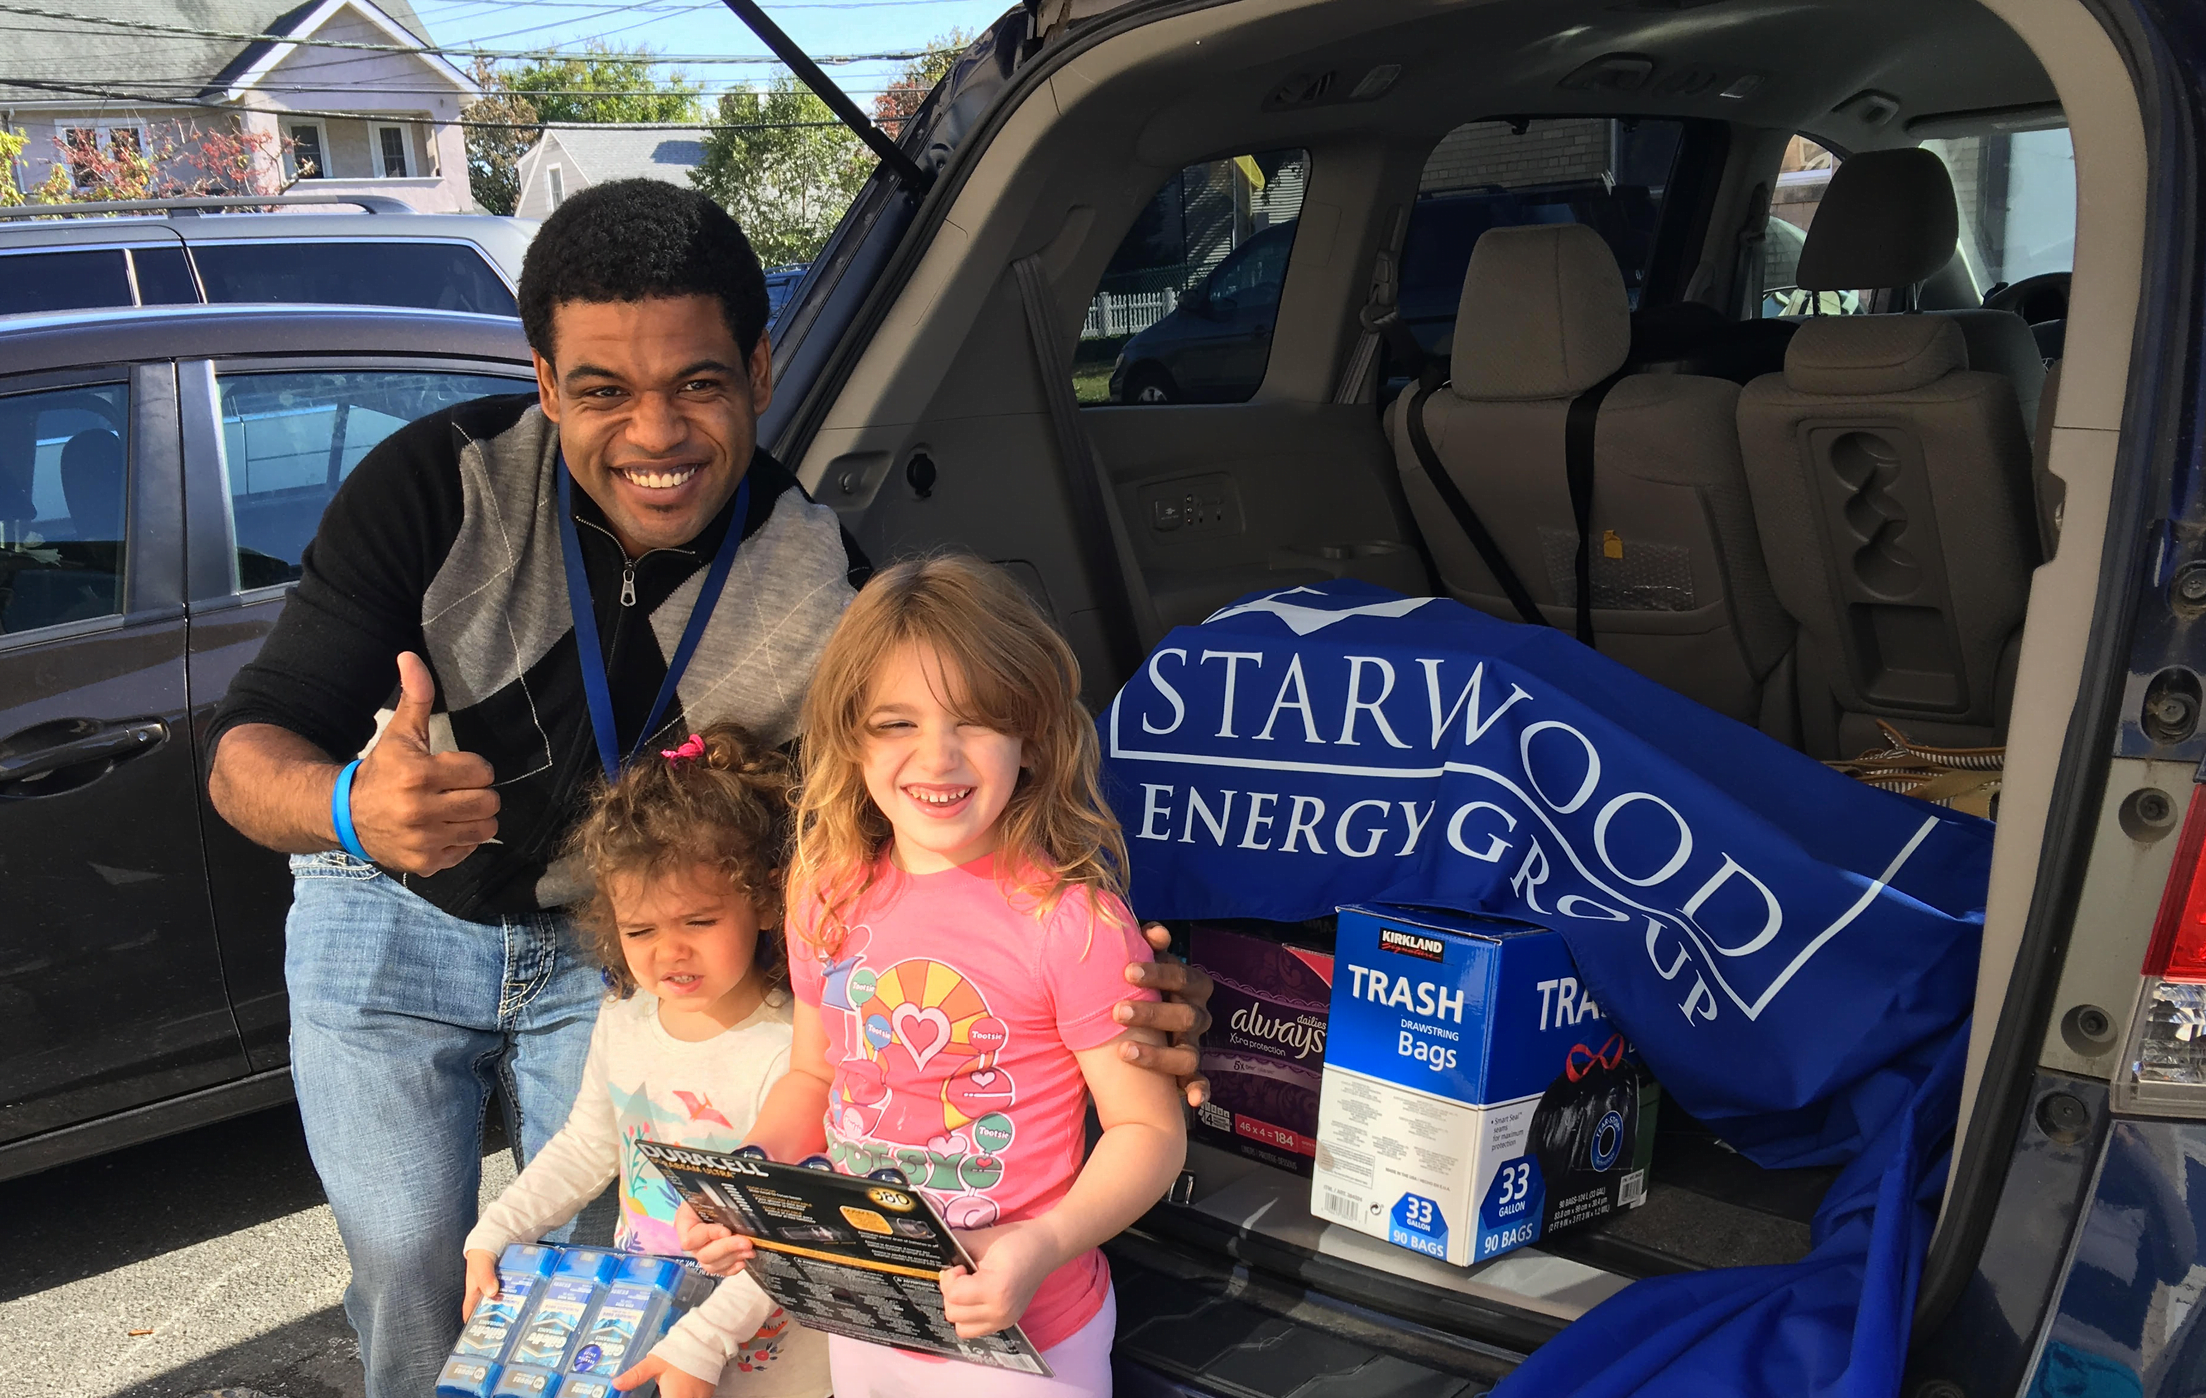 Preschool Teacher Jordan Rose helps unload donations from the Starwood Energy Group with assistance from his students Marlowe Ingrassia and Victoria Toni. 